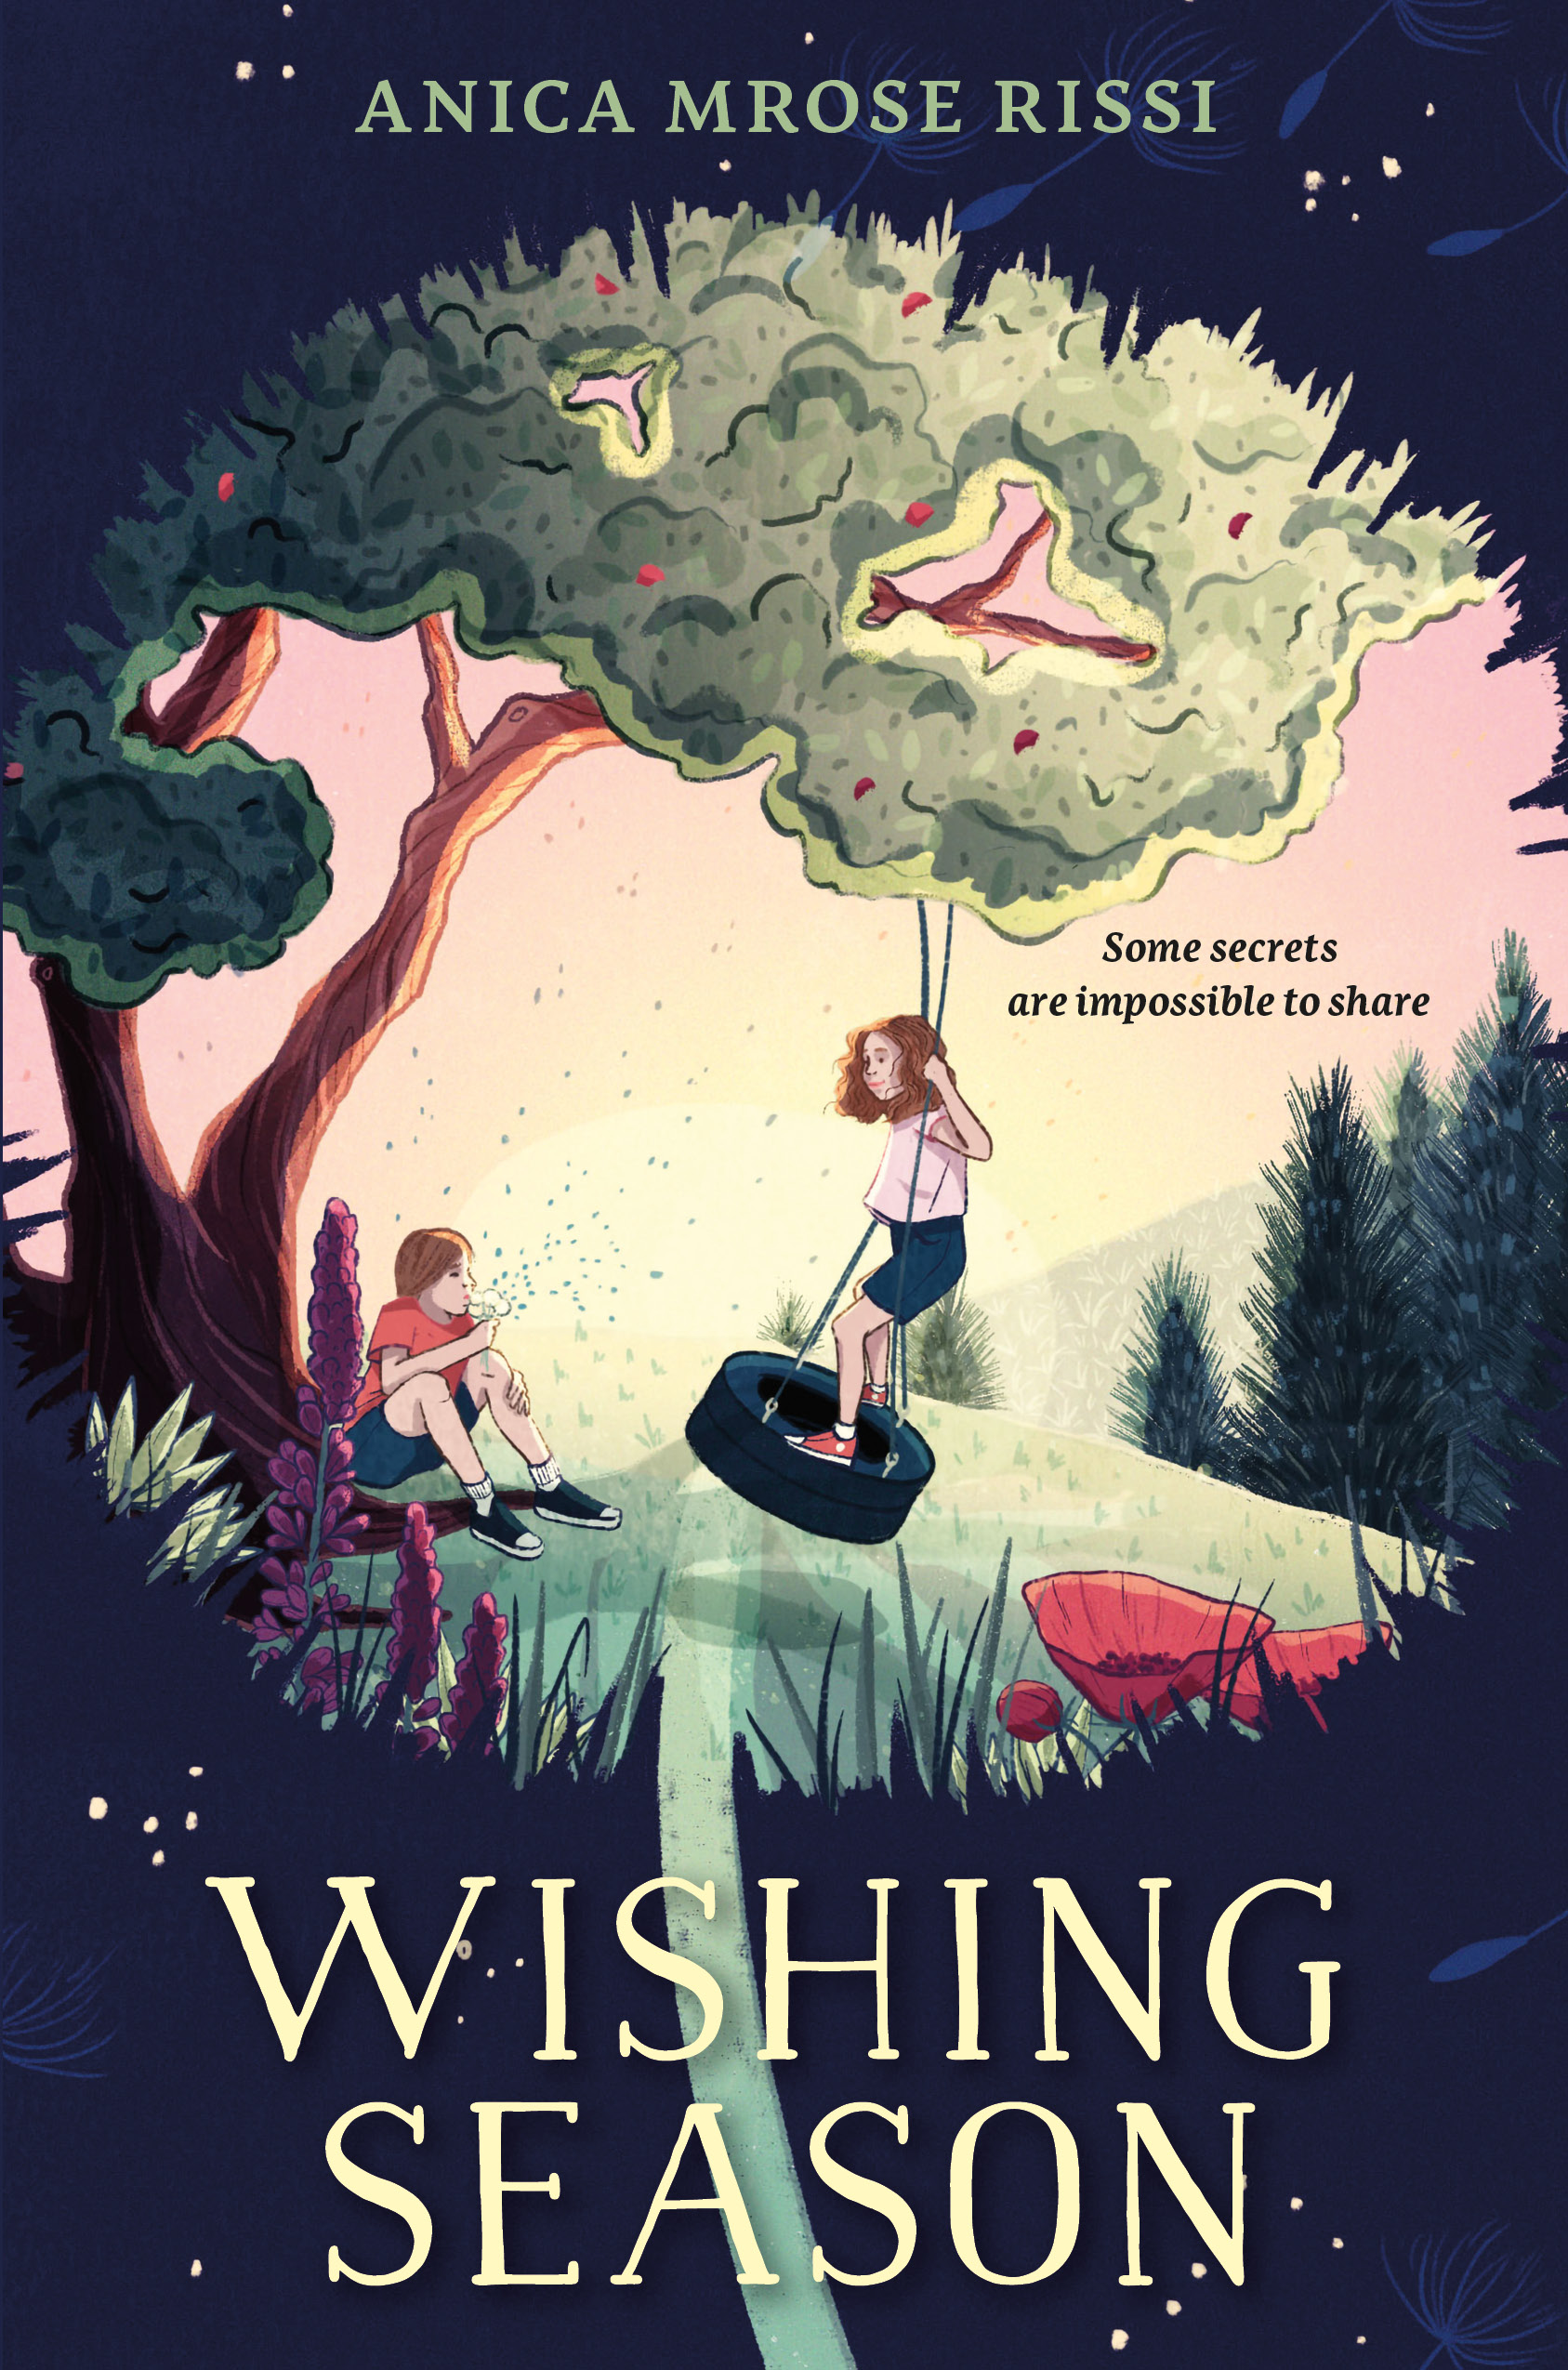 Illustrated cover of the middle grade novel Wishing Season by Anica Mrose Rissi (illustration by Kailey Whitman), showing a girl on a tire swing and a boy seated nearby blowing dandelion seeds, both within a silhouetted puffy dandelion shape